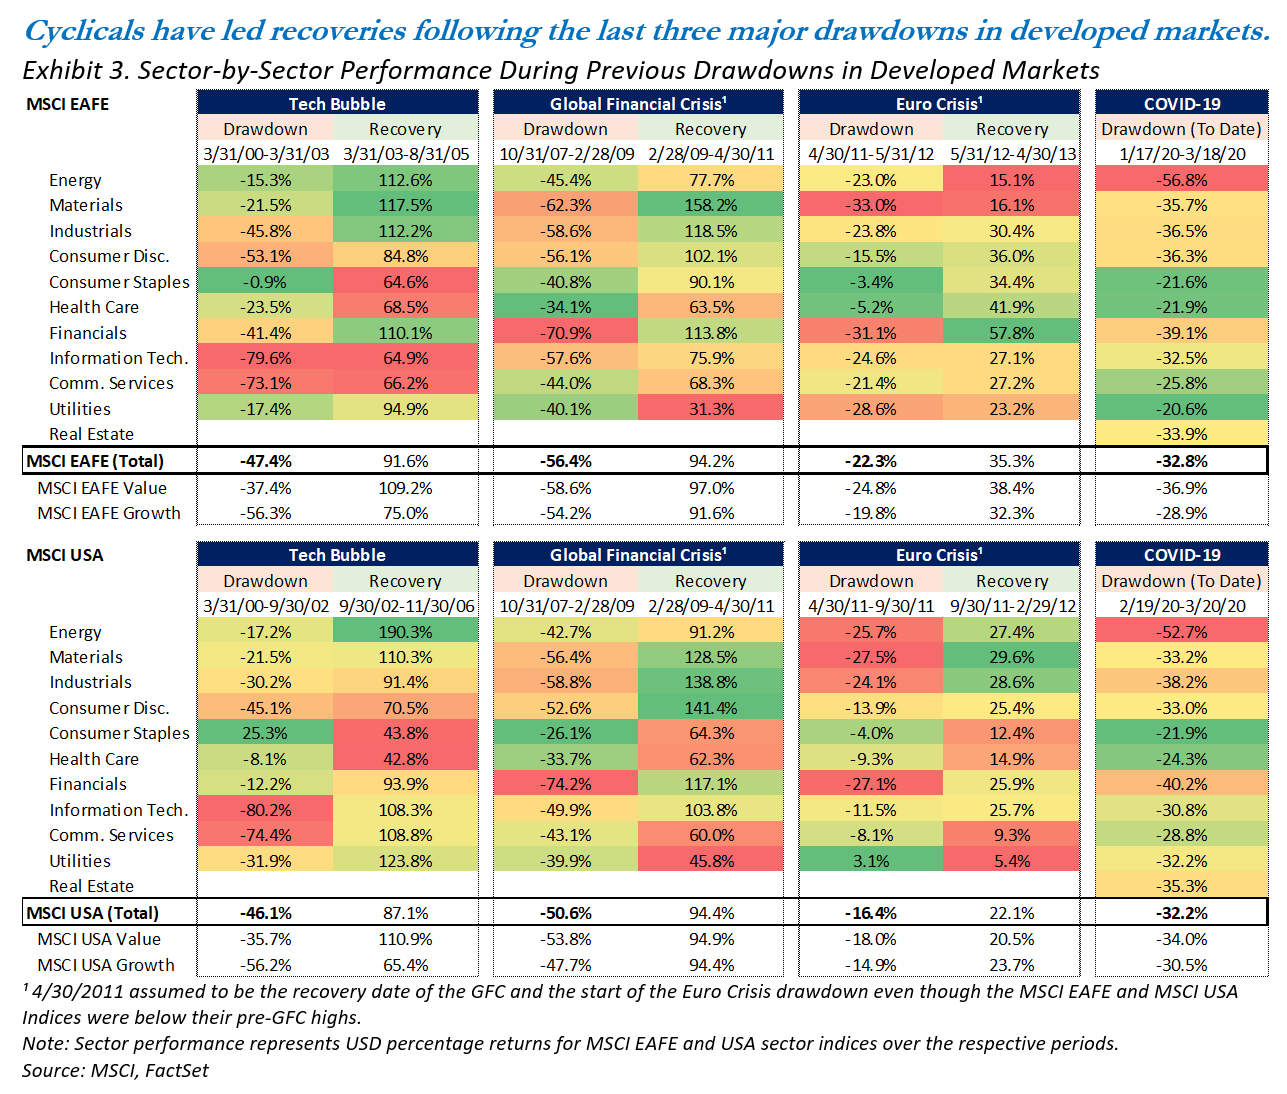 Exhibit 3. Sector-by-Sector Performance During Previous Drawdowns in Developed Markets